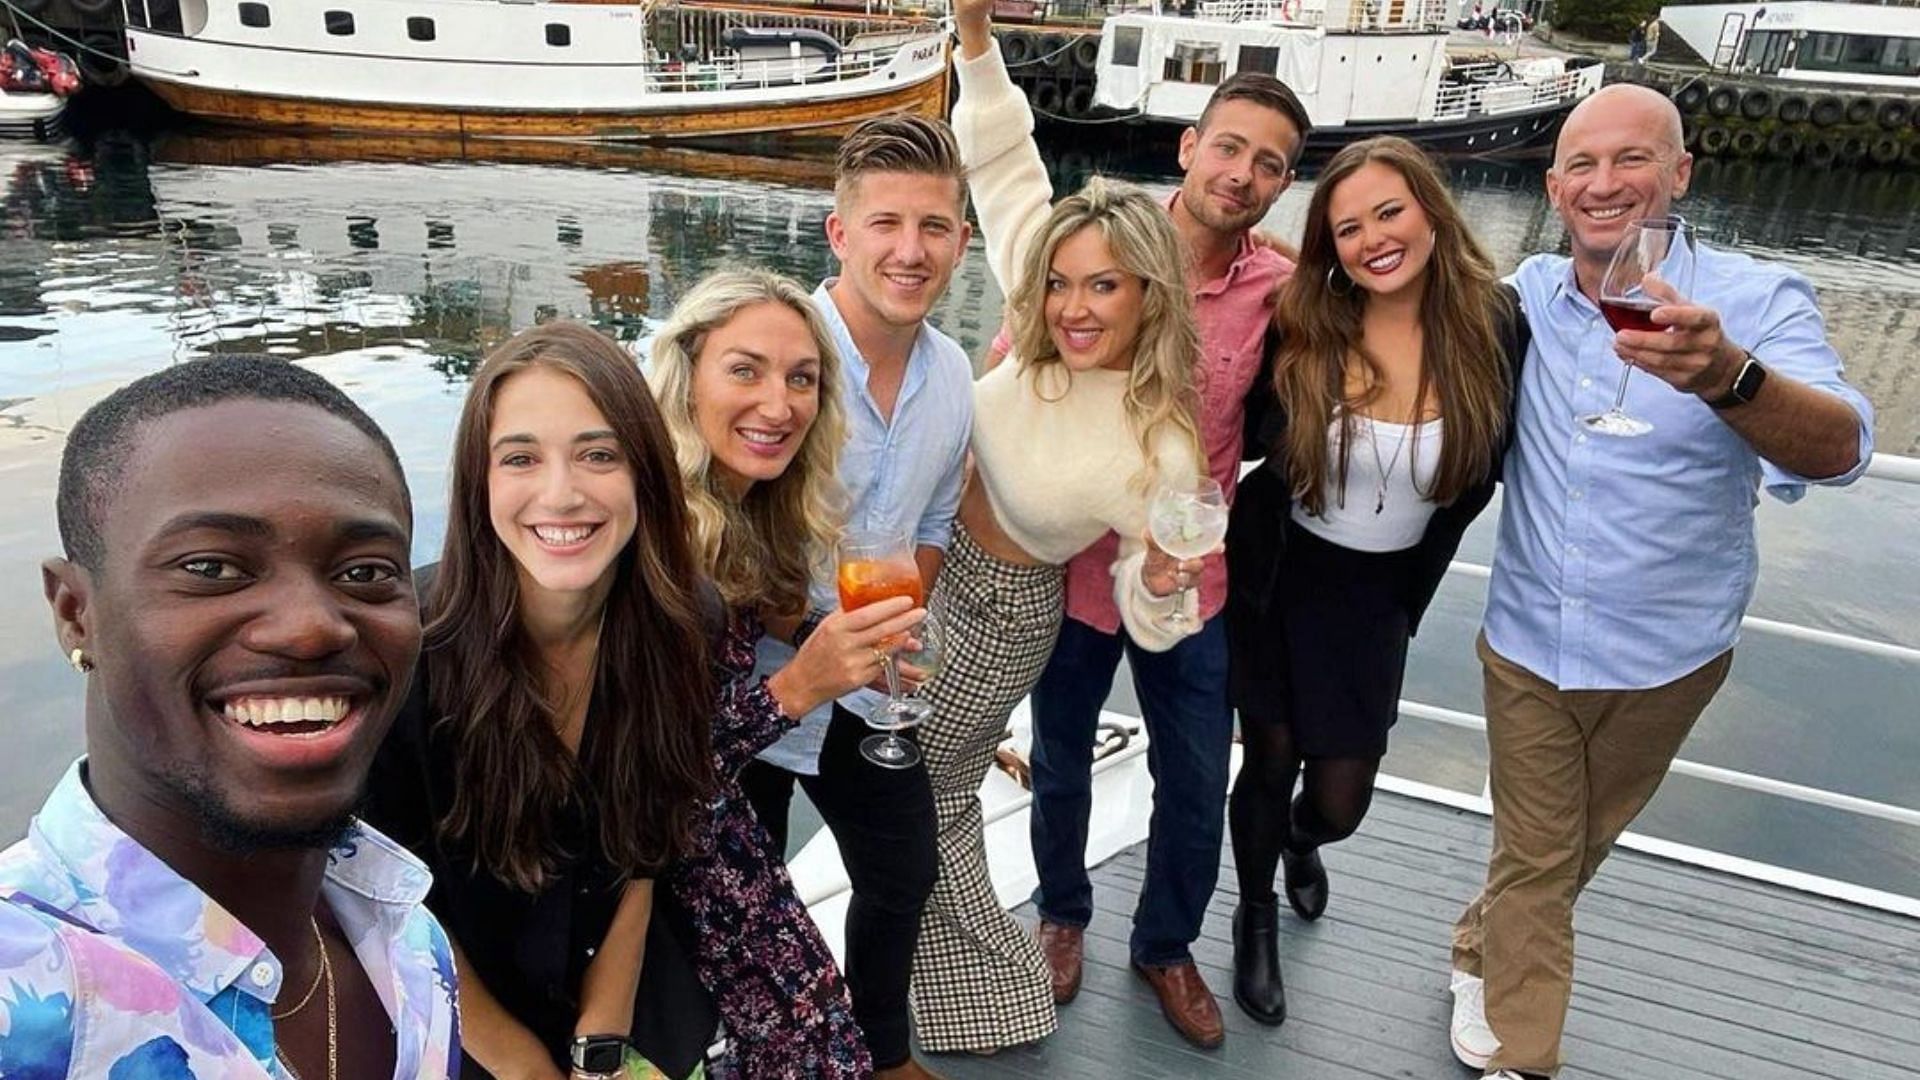 Where to follow the cast of Below Deck Adventure on Instagram